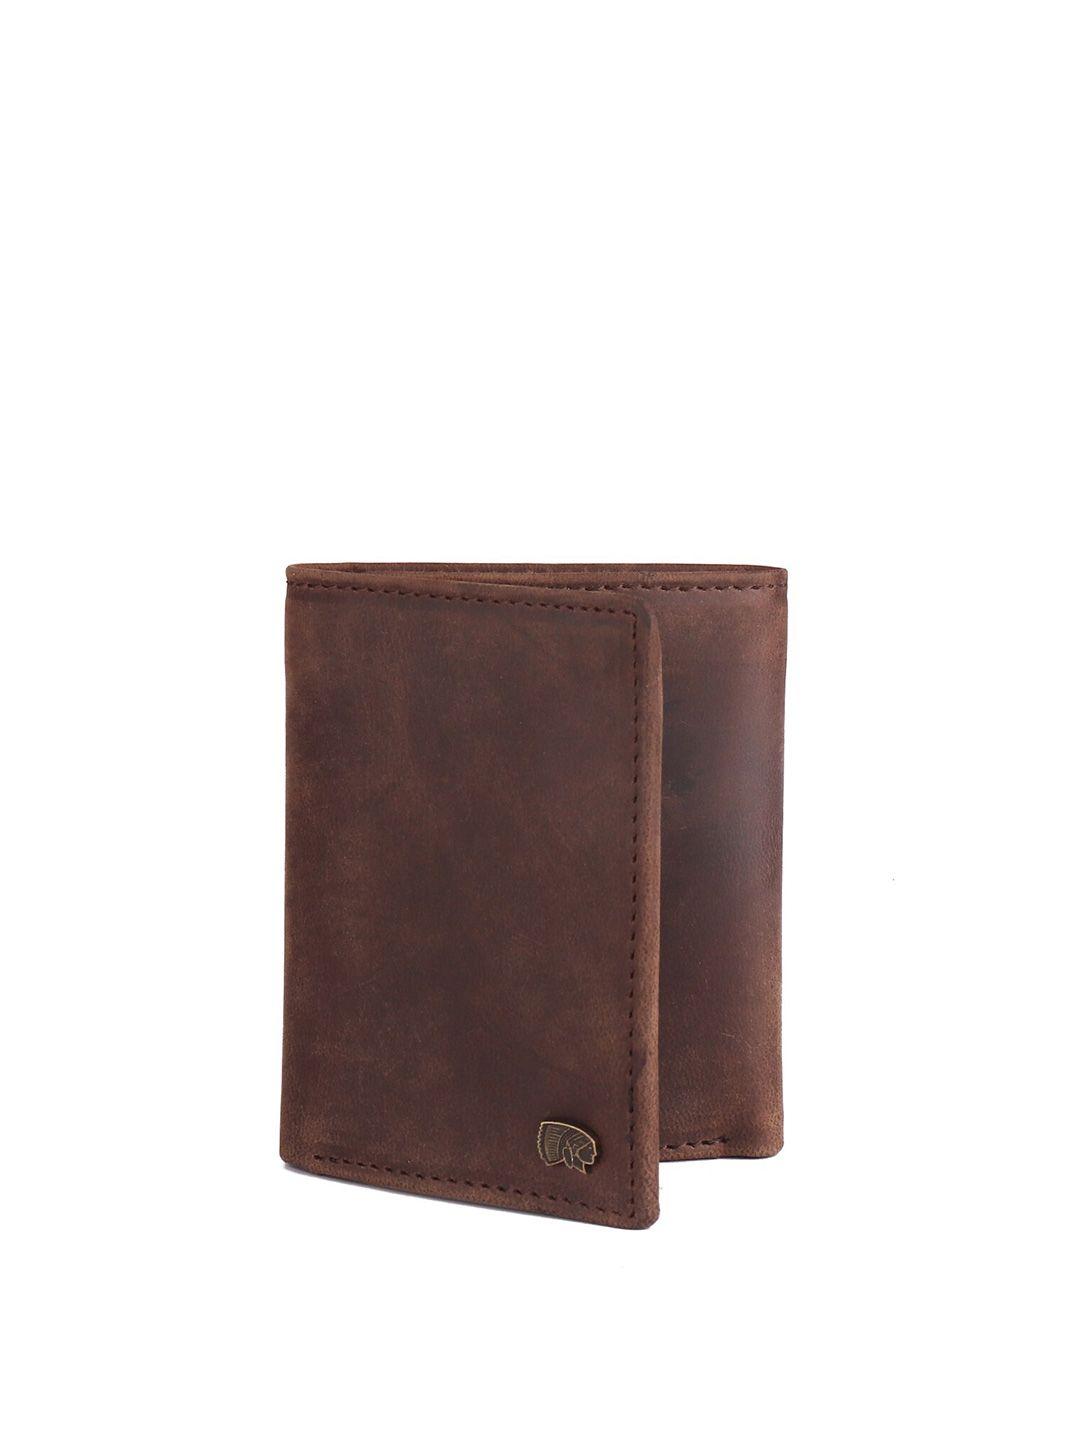 red-chief-men-brown-leather-three-fold-wallet